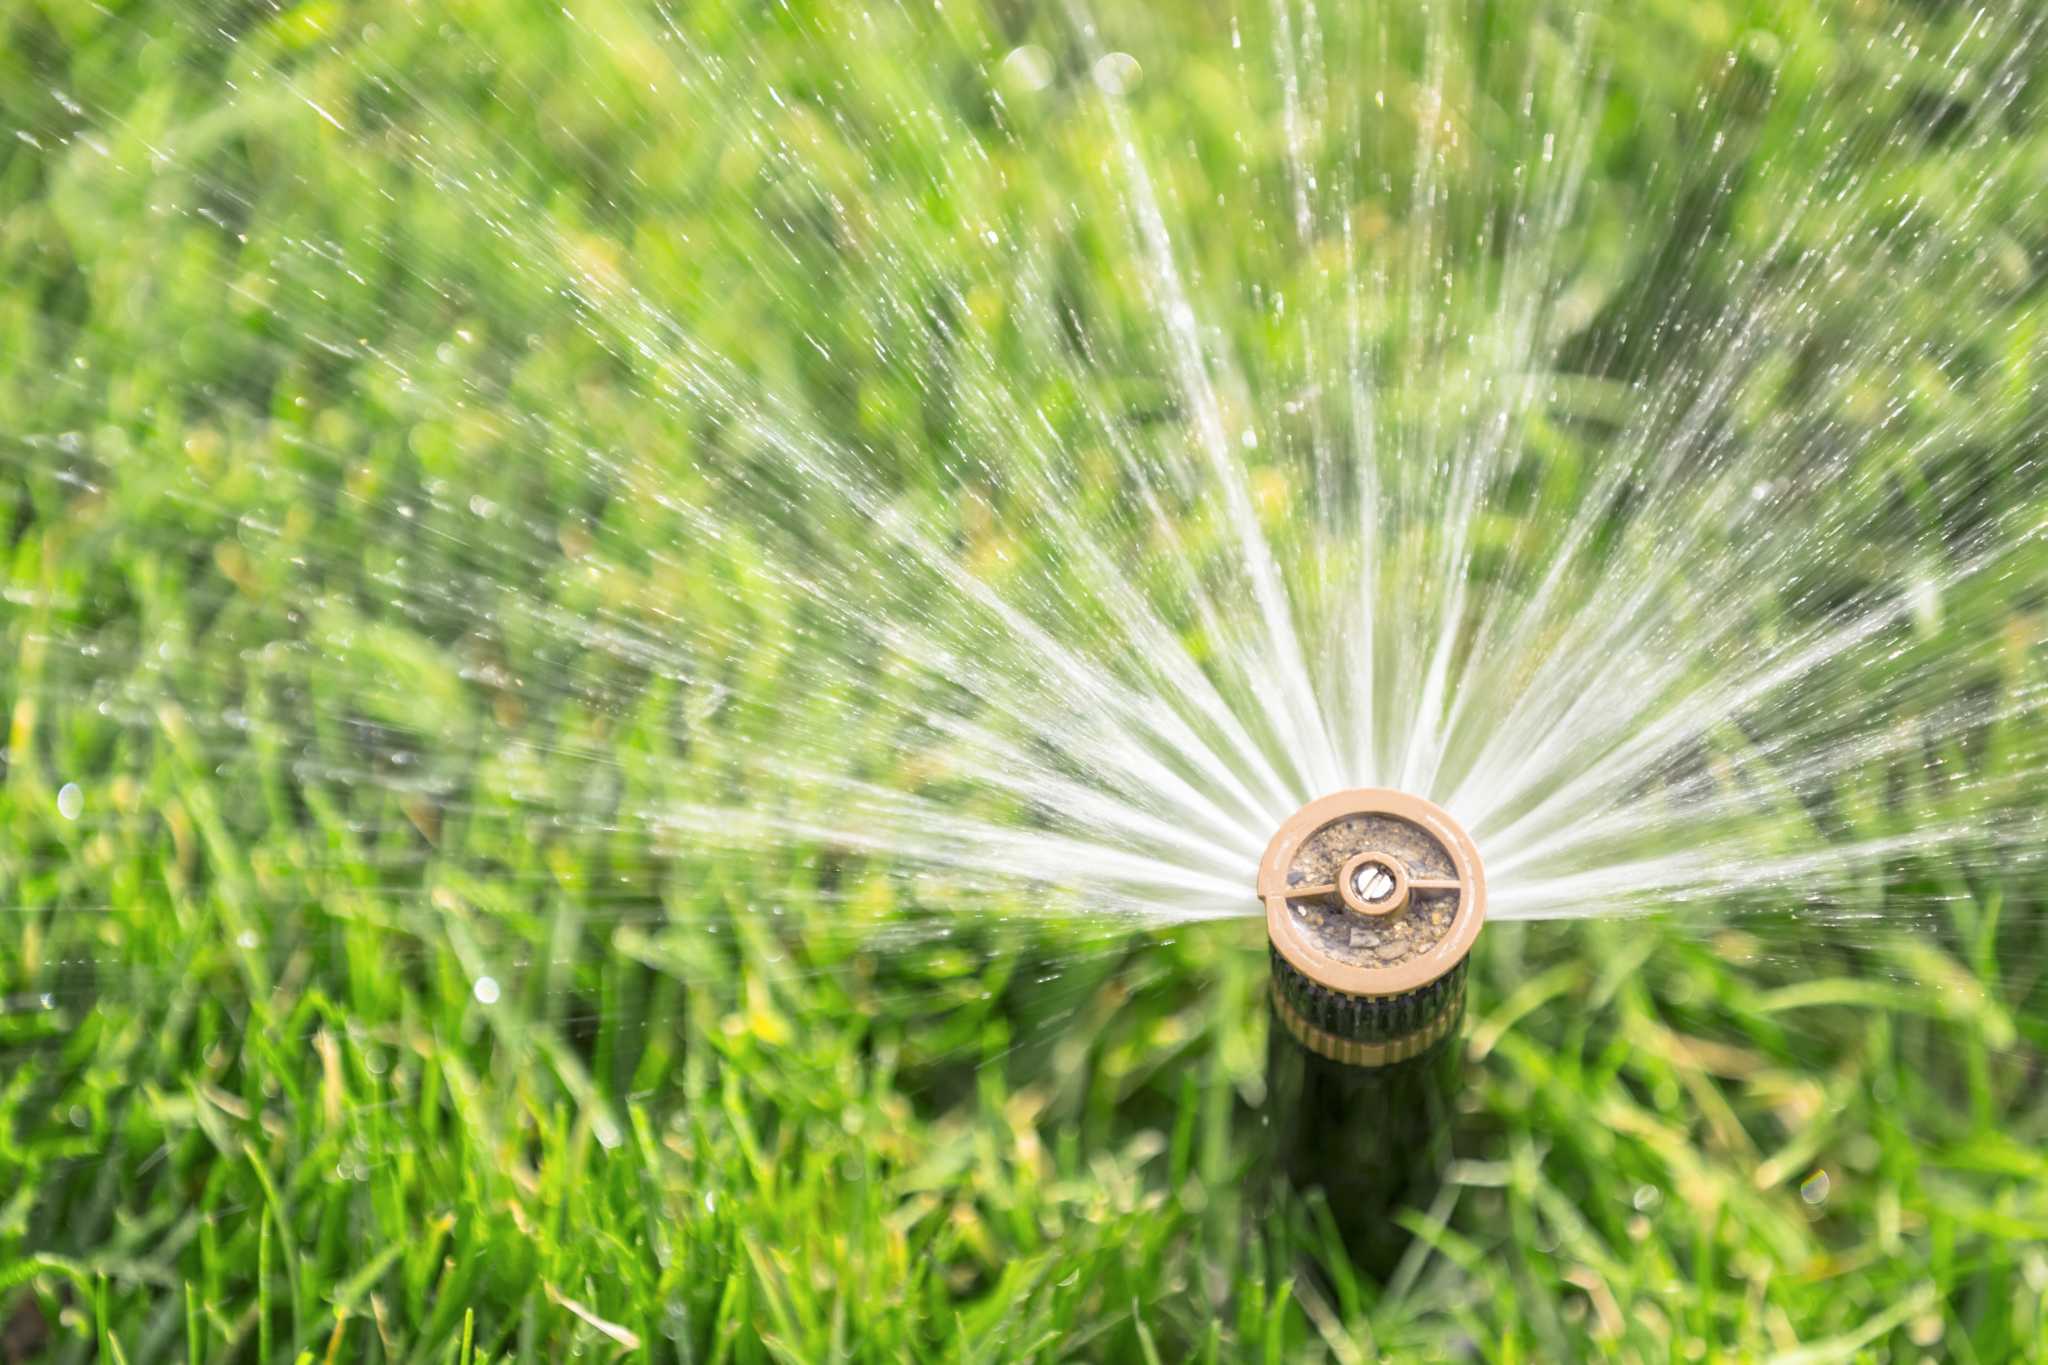 How To Increase Pressure In Irrigation System